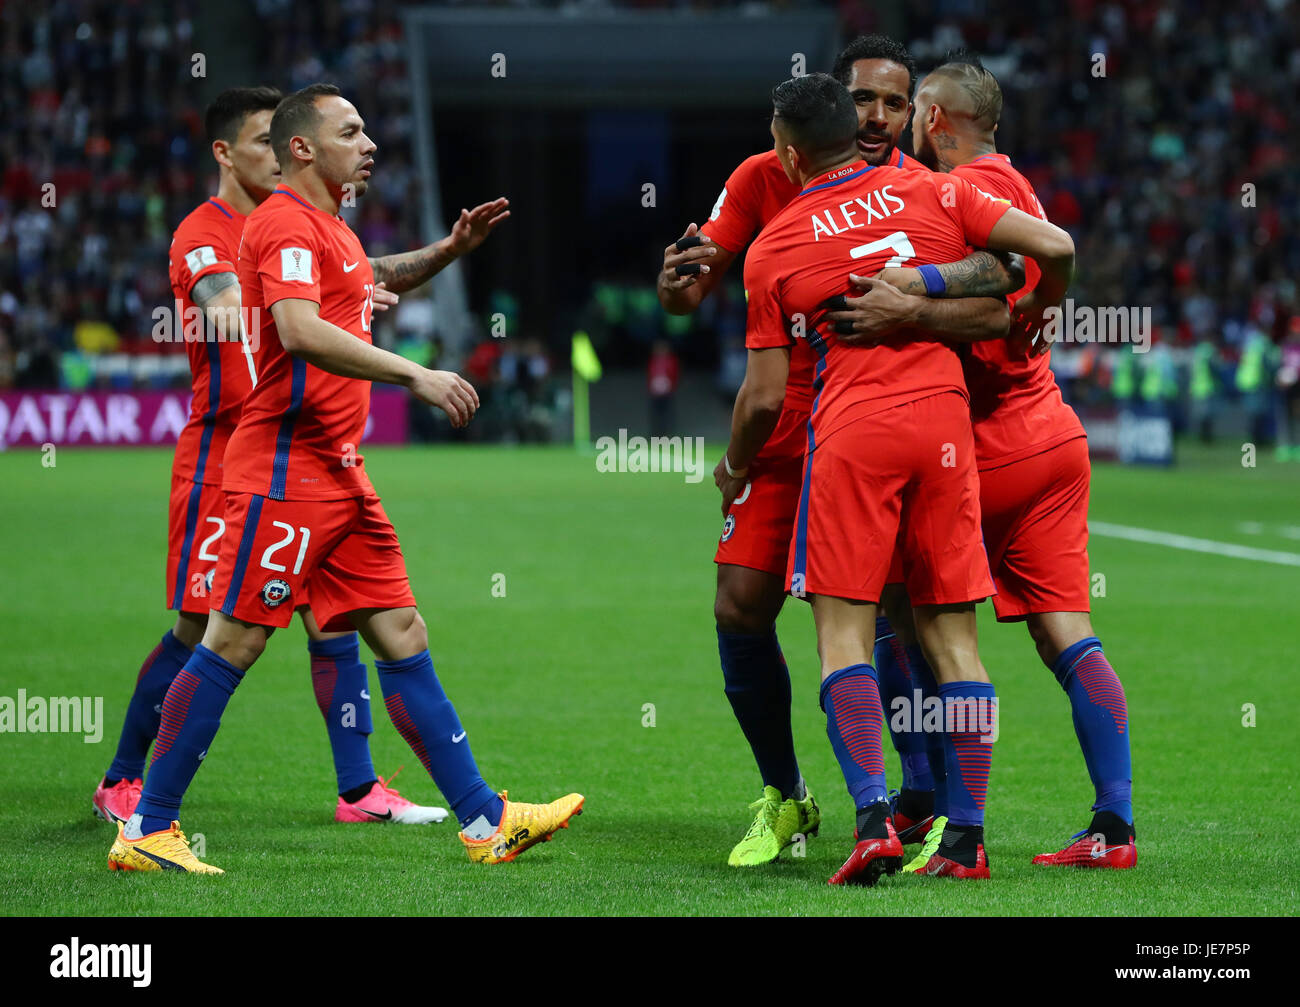 Kazan, Russia. 22nd June, 2017. Chile's Alexis Sanchez (3rd from right) celebrates scoring the opening goal with his teammates during the Group B preliminary stage soccer match between Chile and Germany at the Confederations Cup in Kazan, Russia, 22 June 2017. Photo: Christian Charisius/dpa/Alamy Live News Stock Photo